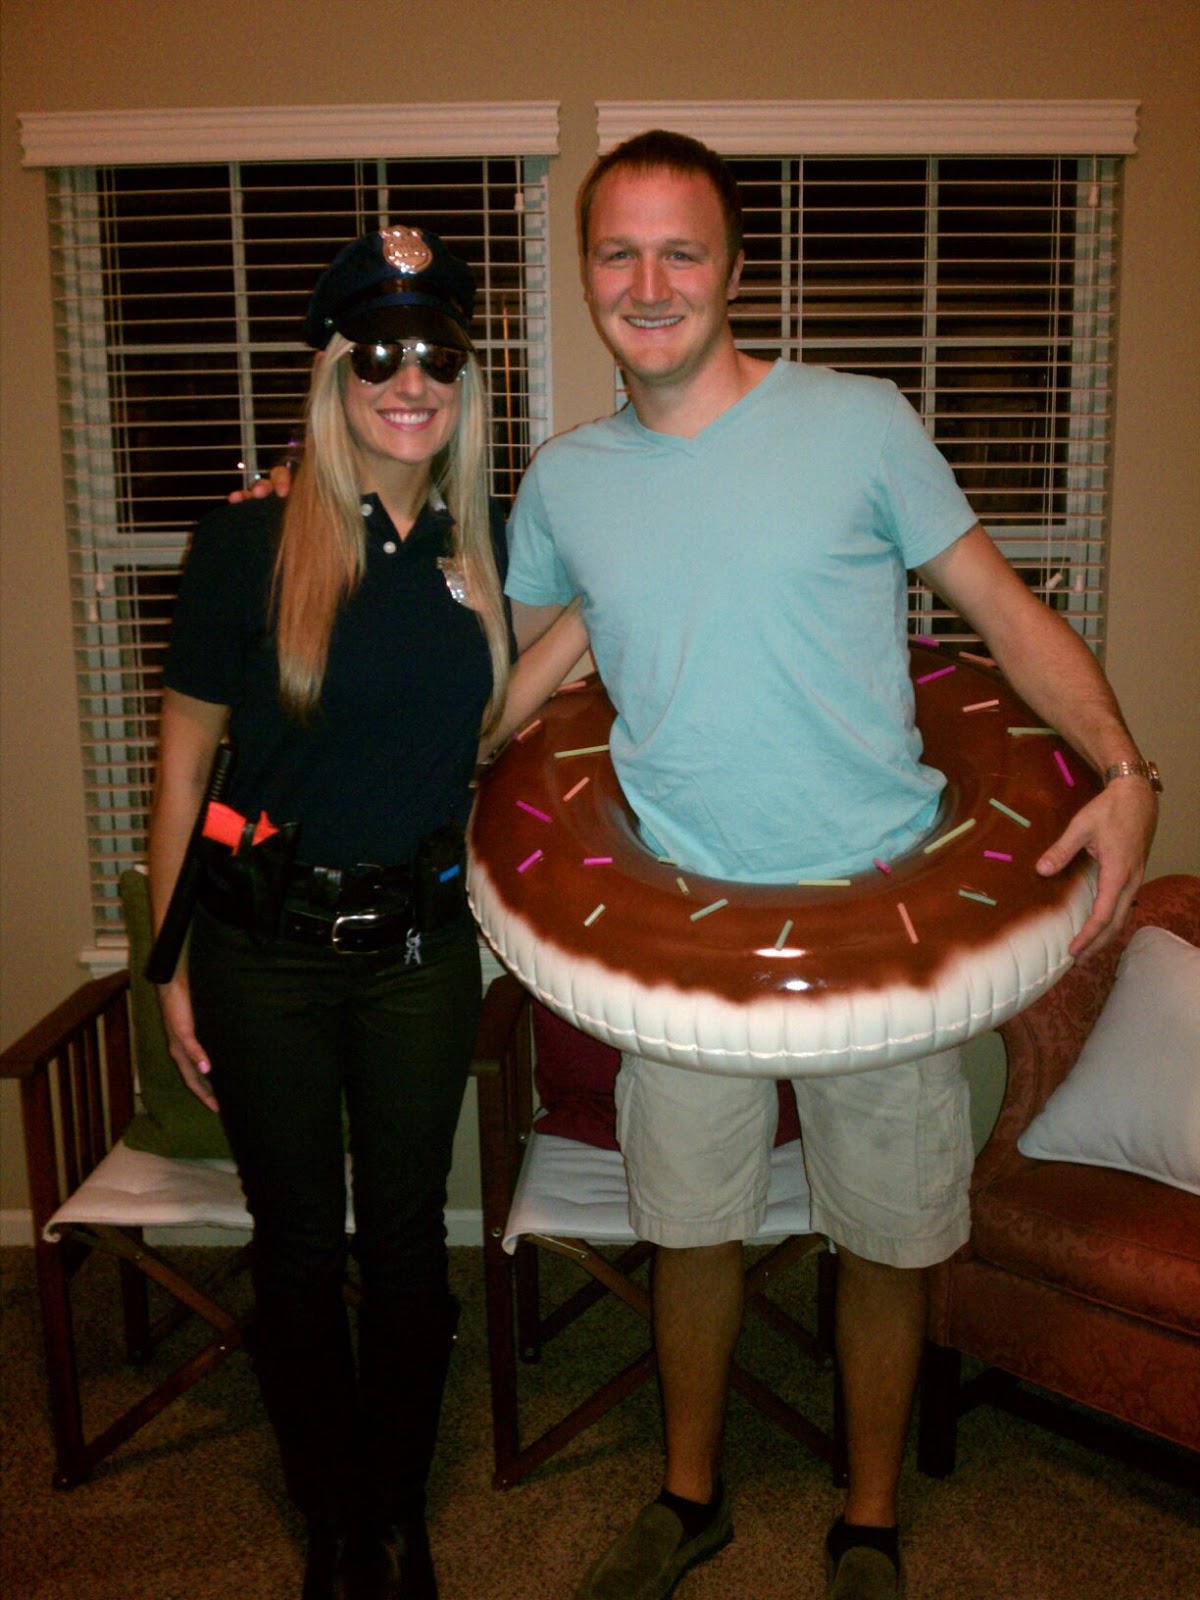 30 Best And Crazy Halloween Couple Costume Ideas Flawssy 0154